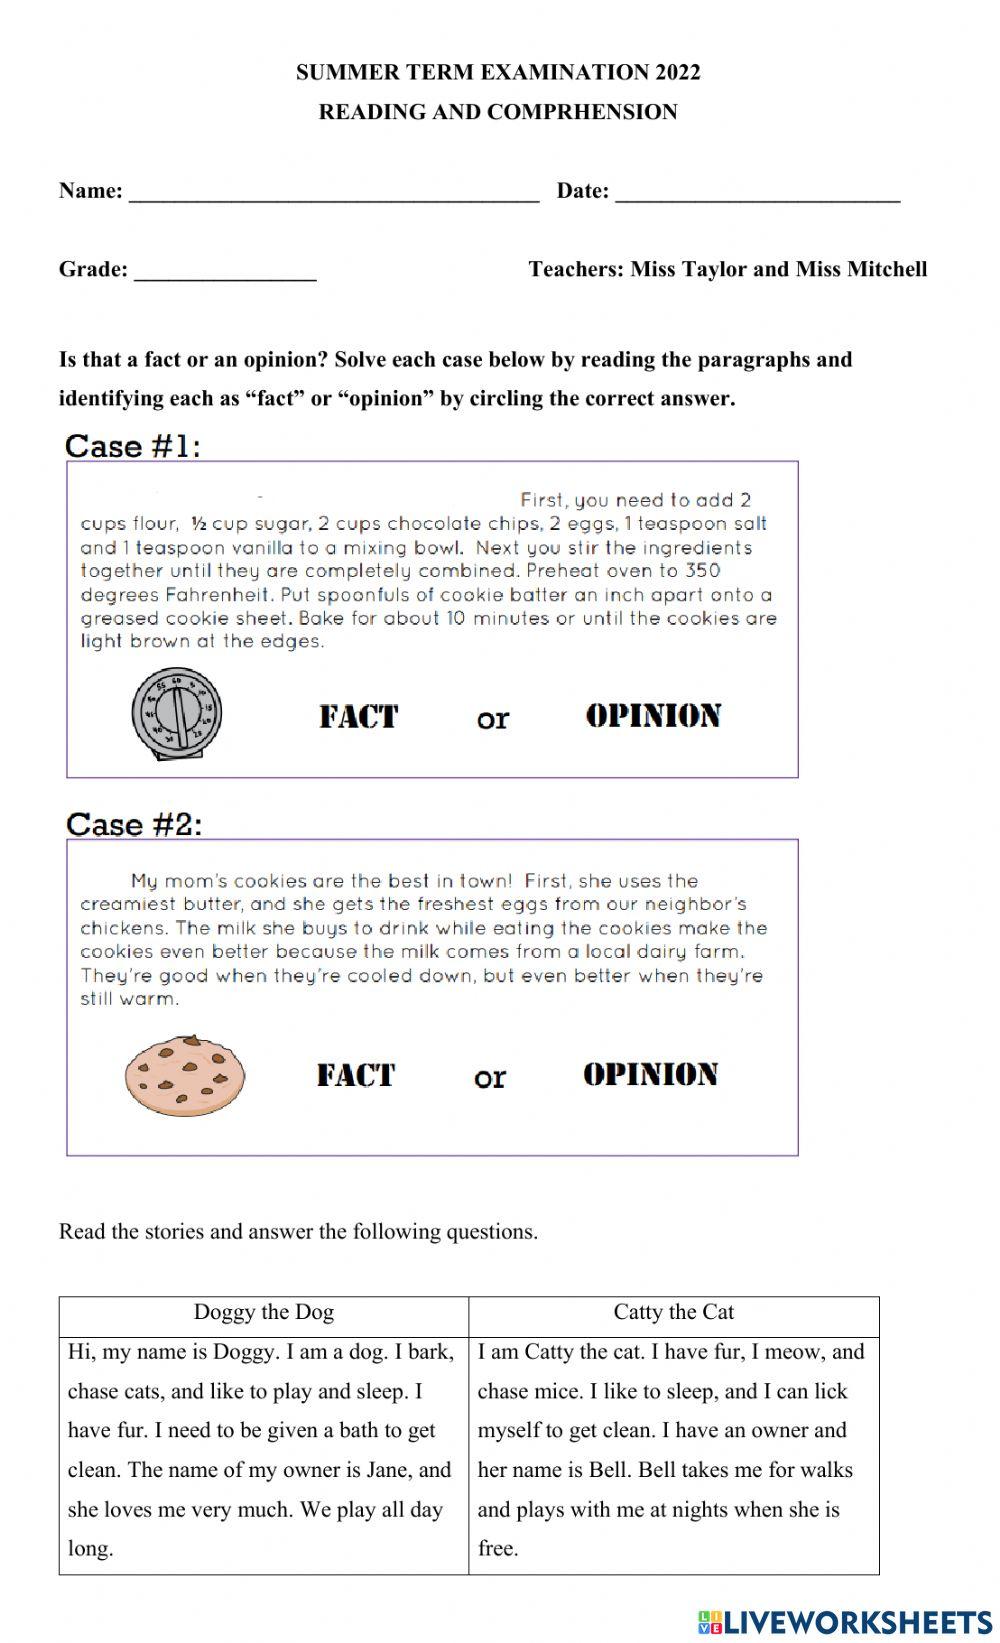 Reading and Comprehension Assessment